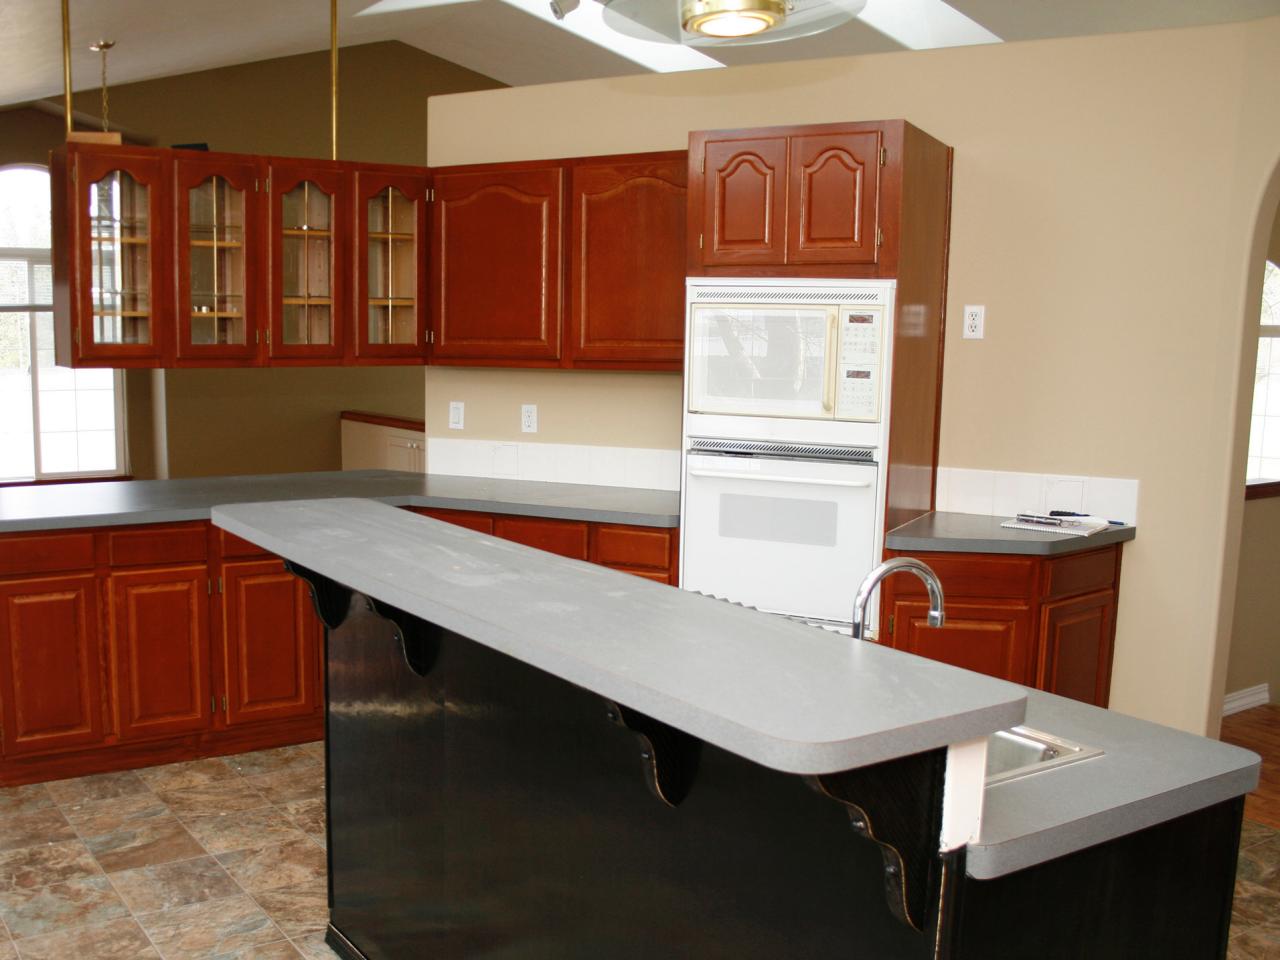 Kitchen Remodeling: Upgrade Your Kitchen